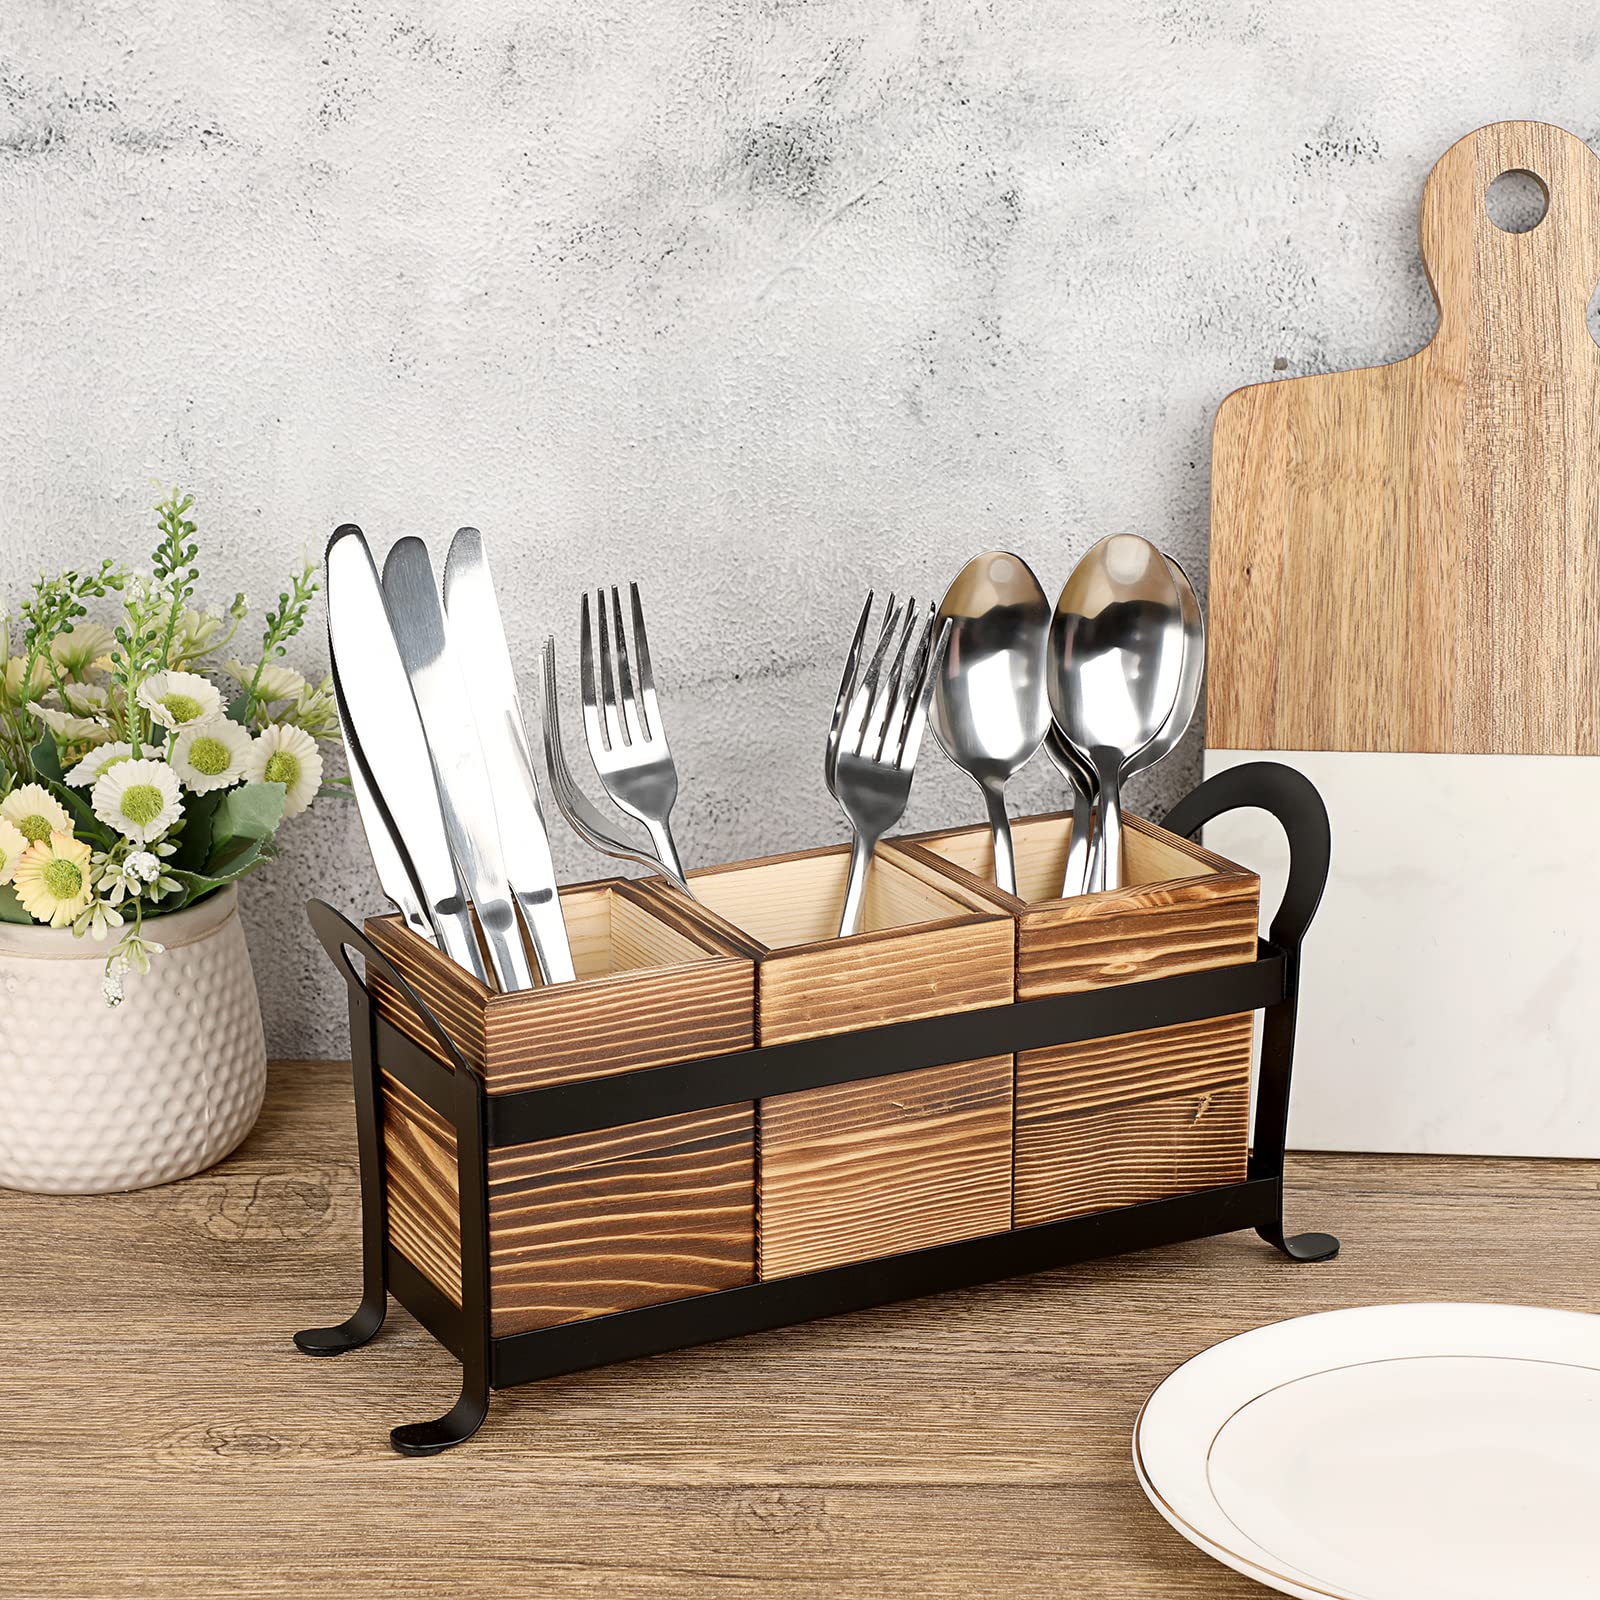 JUXYES Wood Utensil Holder for Party, Vintage Cutlery Holder Holder With Black Metal Rack, Rustic Countertop Flatware Organizer with Handle, Wood Silverware Holder Organizer for Kitchen Table